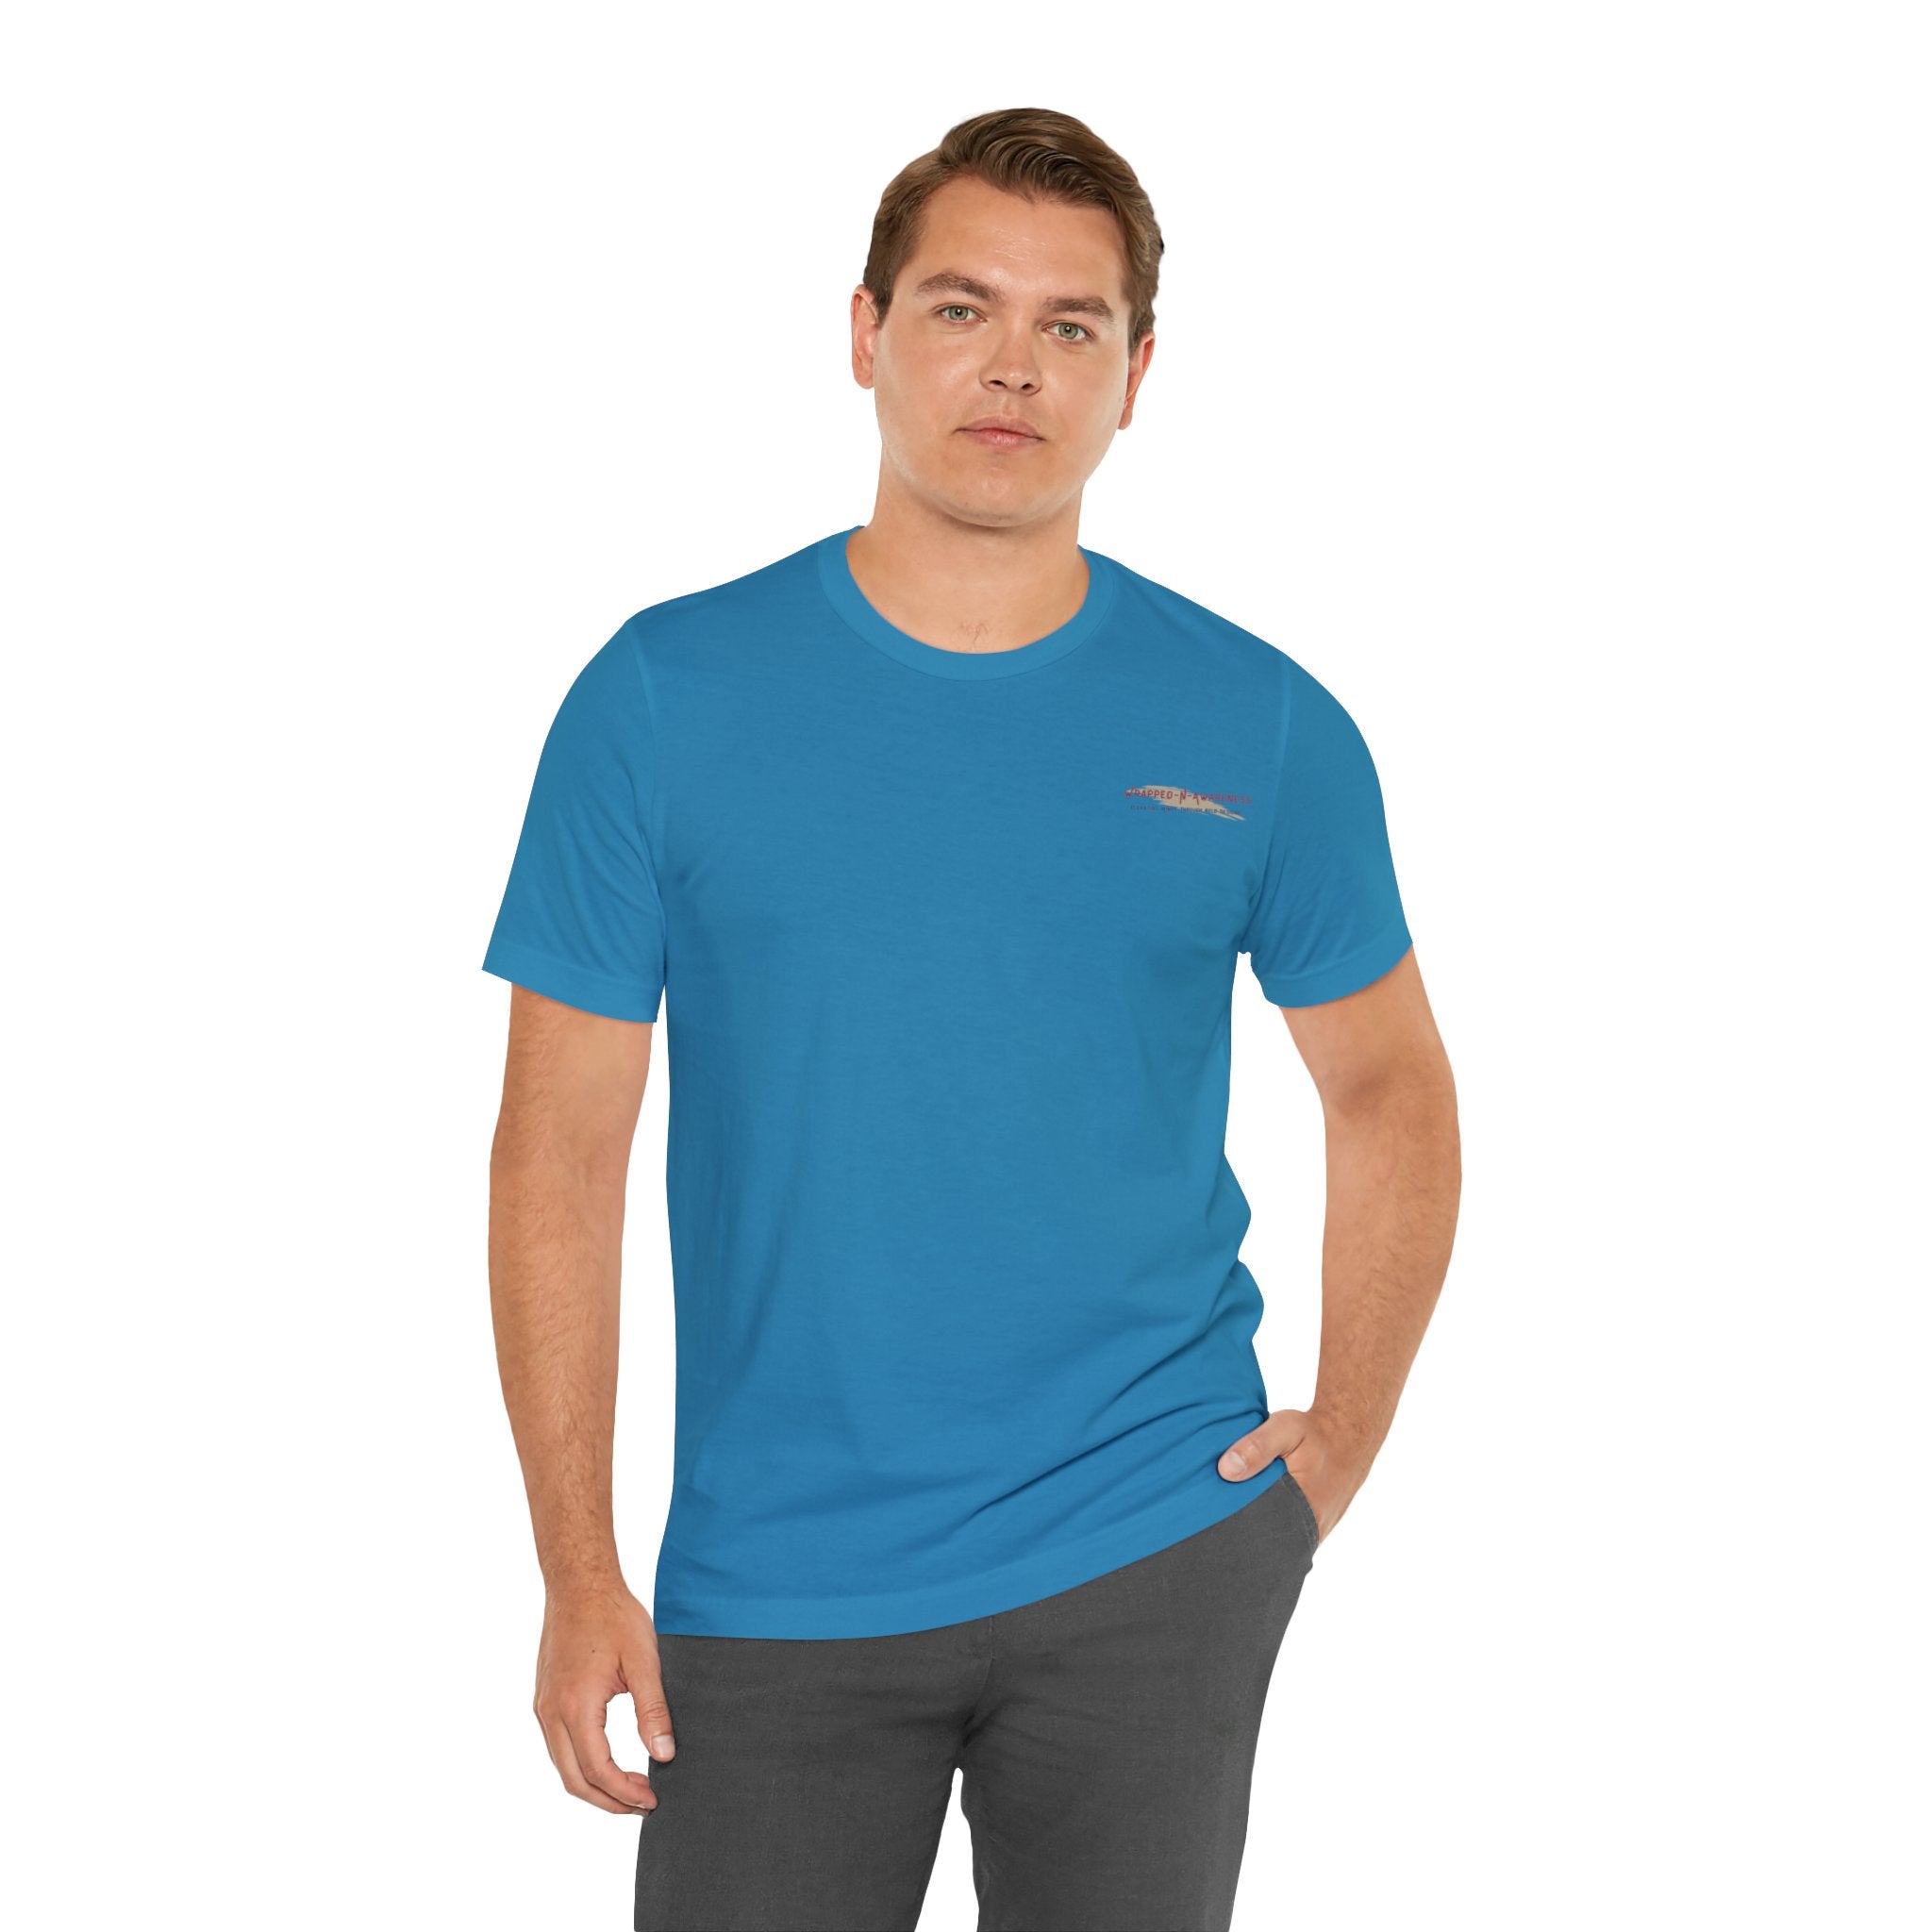 Mindfulness Heals Wounds Tee - Bella+Canvas 3001 Turquoise Airlume Cotton Bella+Canvas 3001 Crew Neckline Jersey Short Sleeve Lightweight Fabric Mental Health Support Retail Fit Tear-away Label Tee Unisex Tee T-Shirt 8228346620987198829_2048 Printify